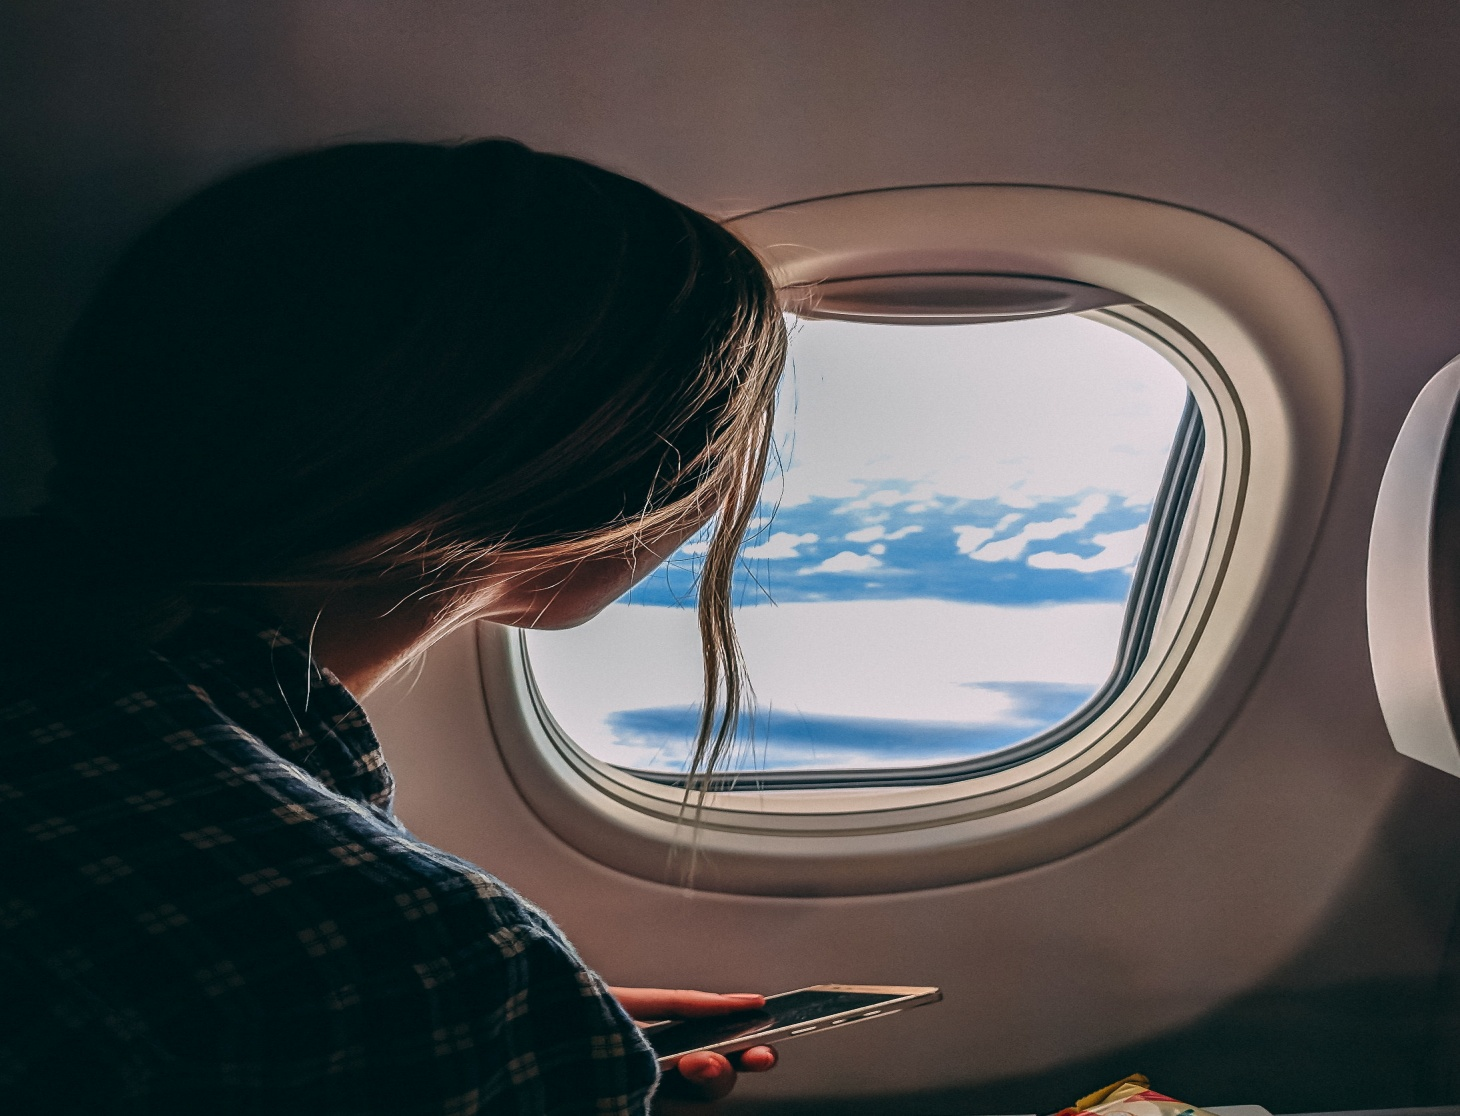 A woman looking out of the plane window.